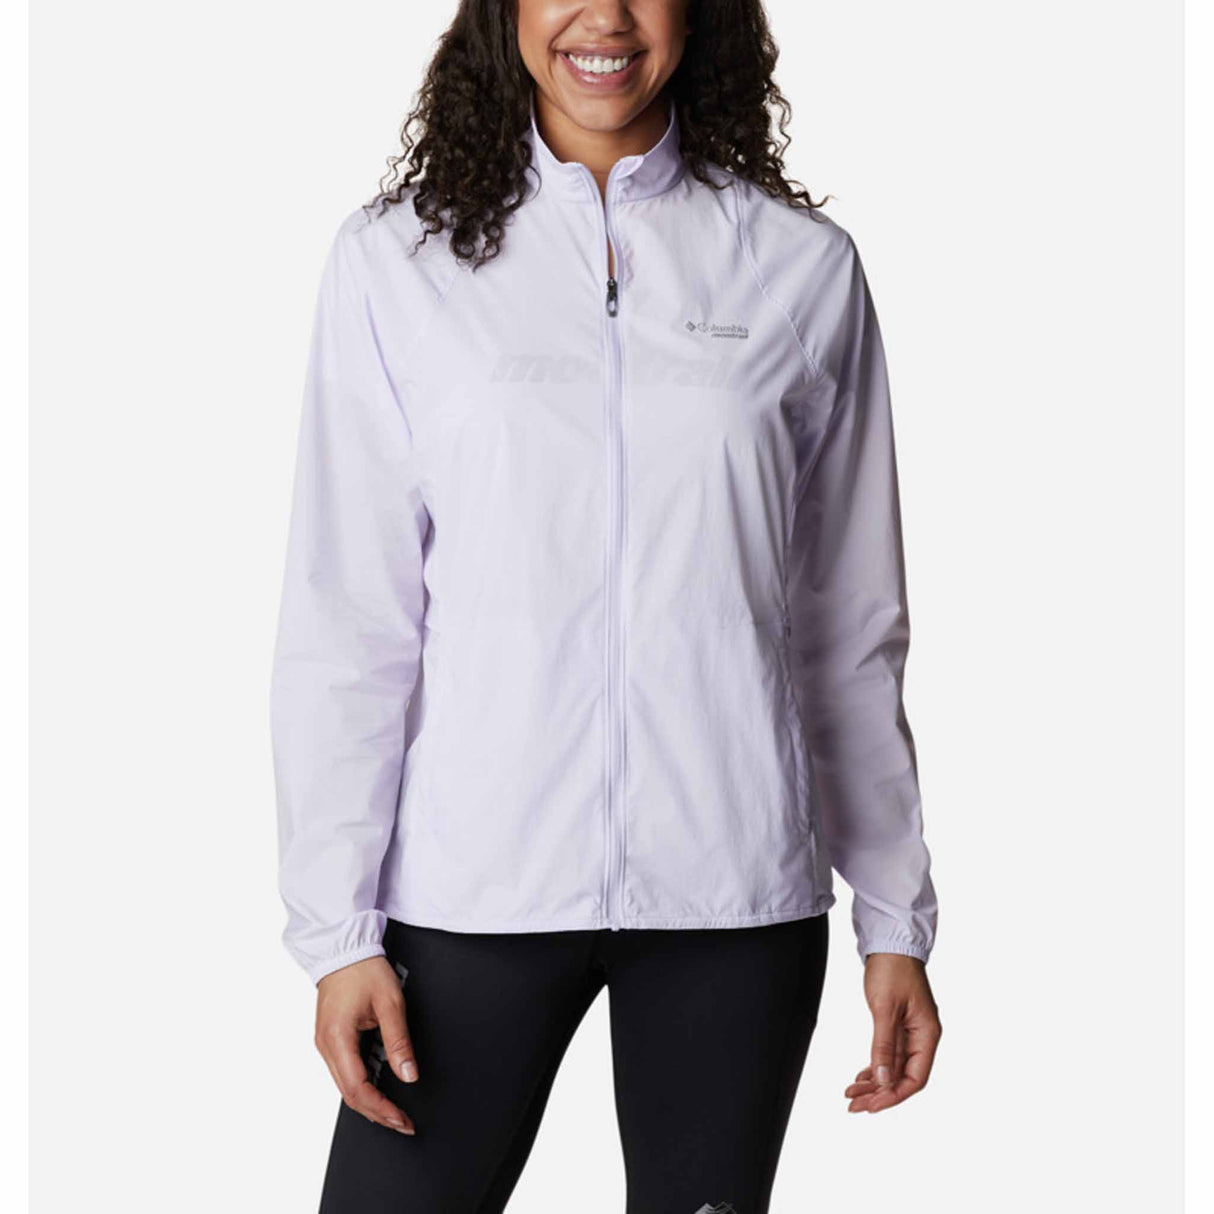 Columbia Endless Trail Wind Shell manteau coupe-vent femme - Purple Tint